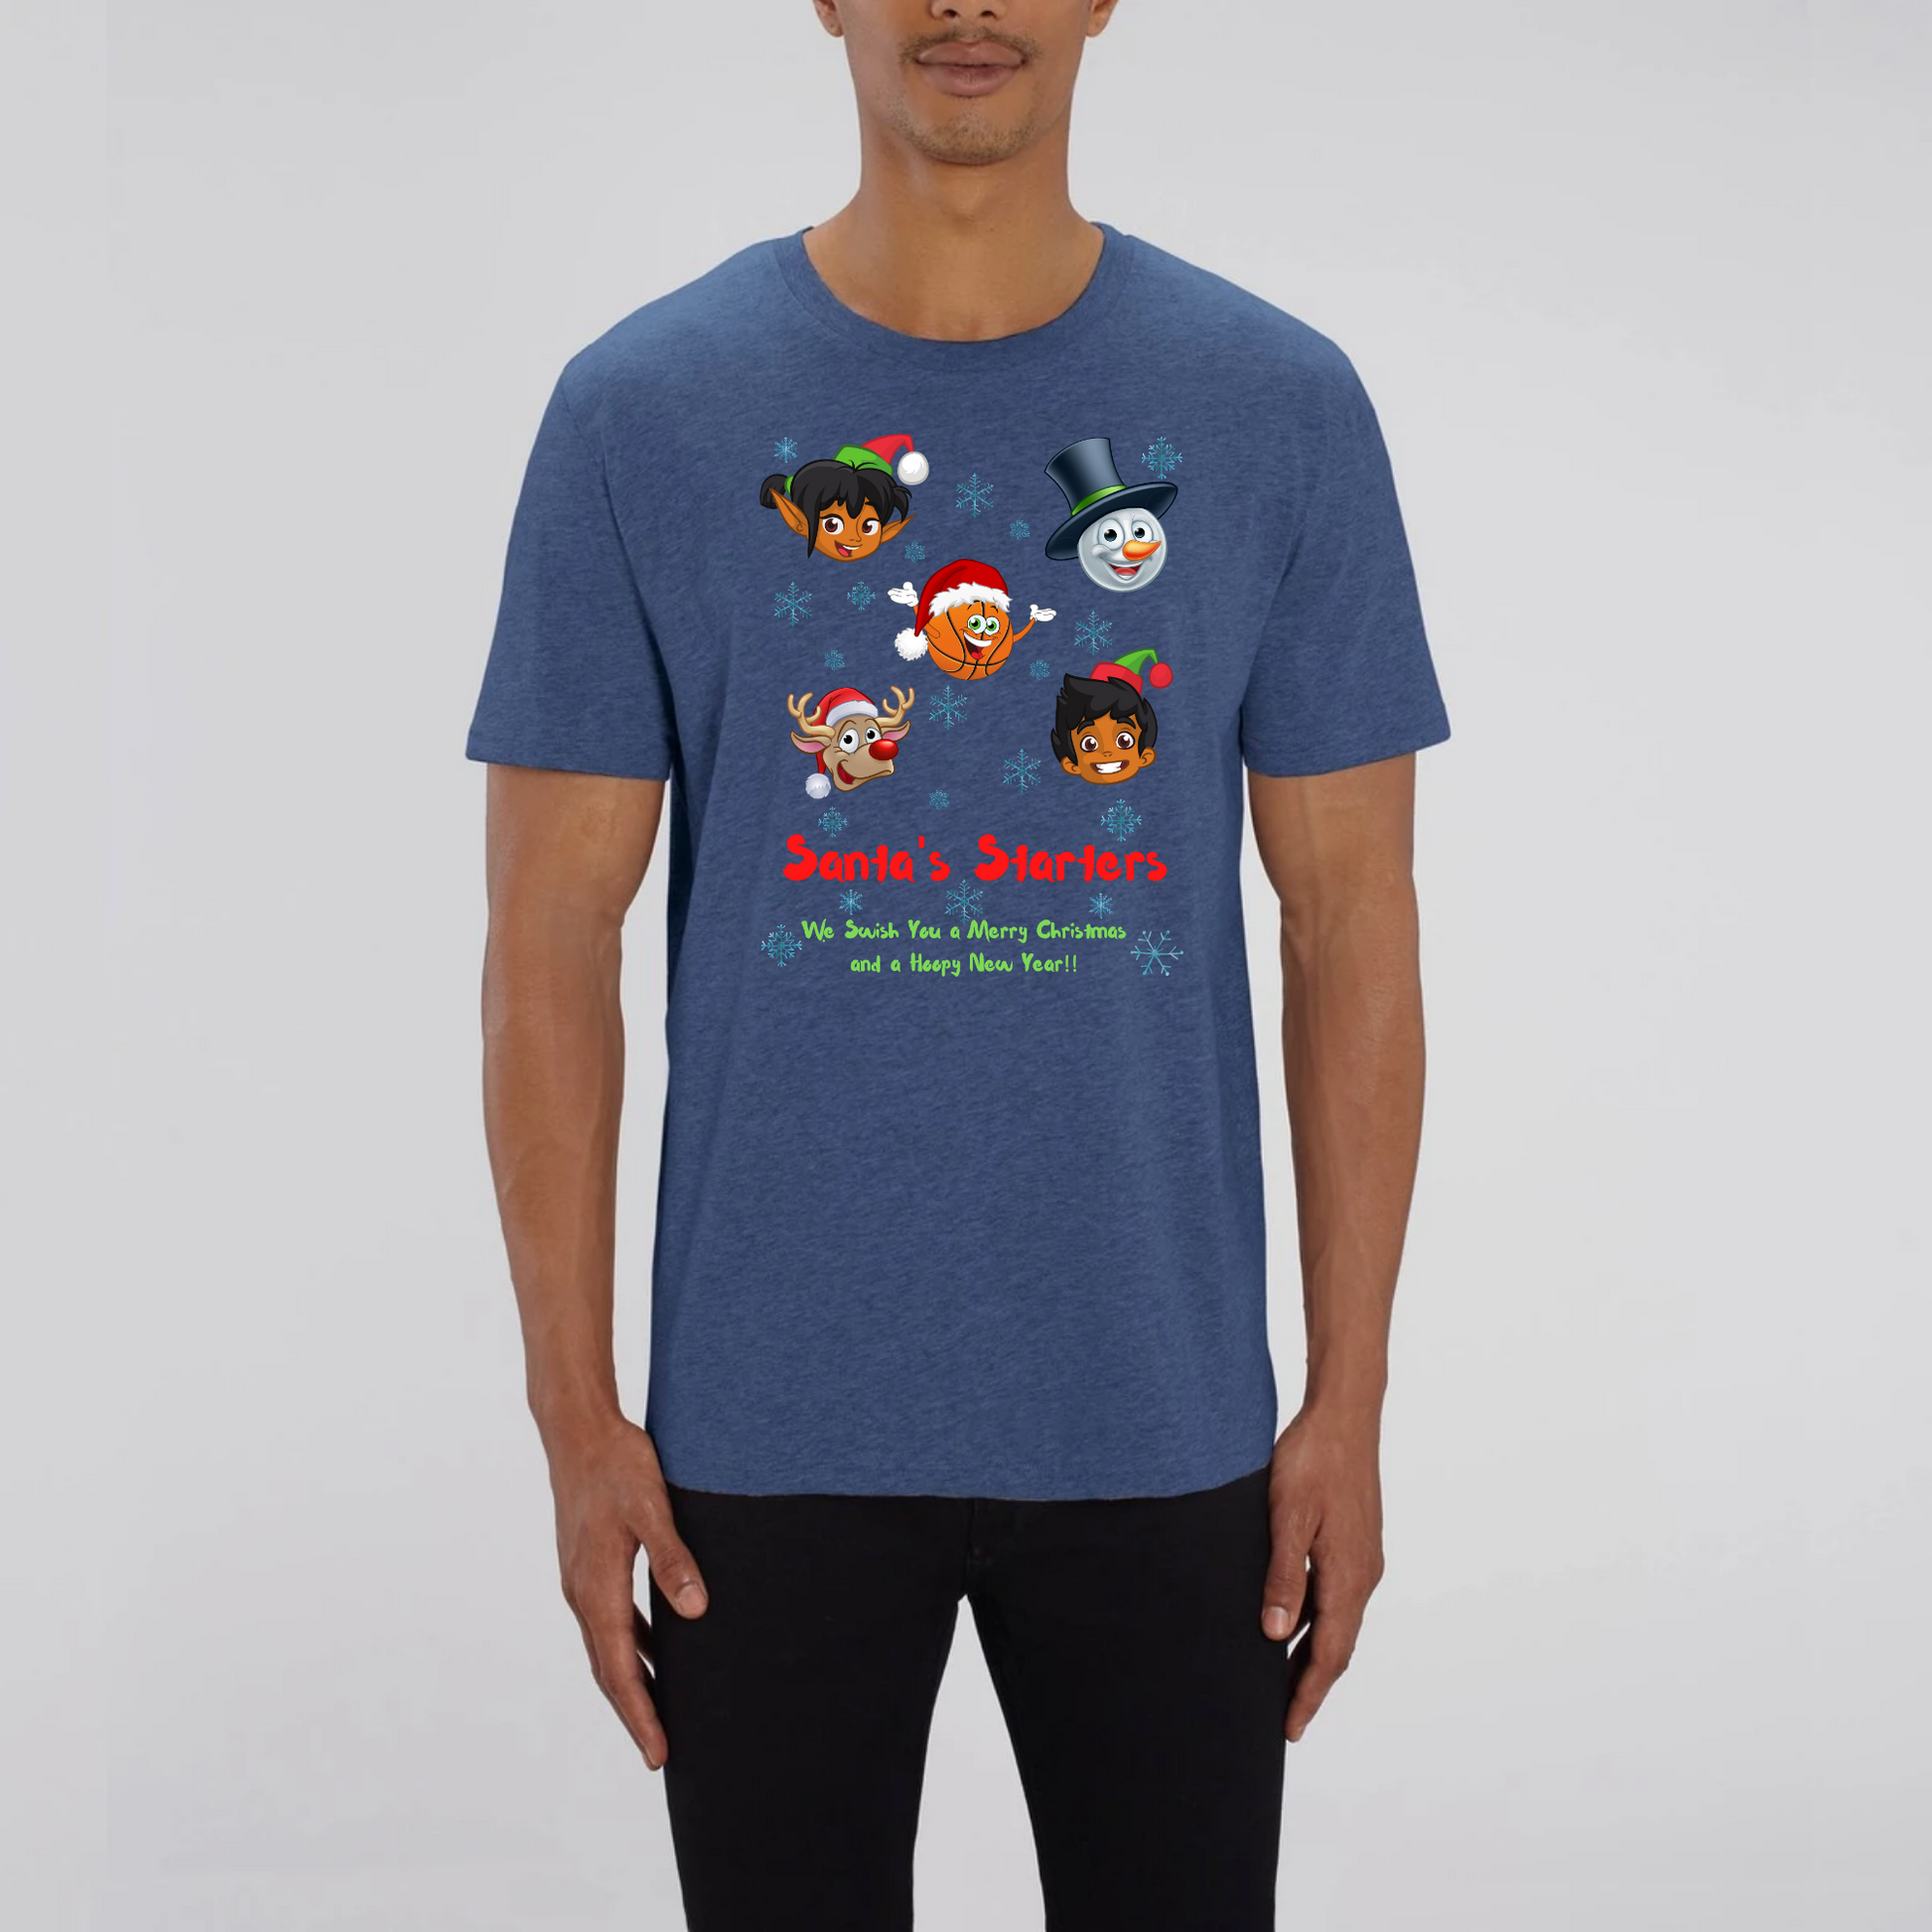 Model wearing a basketball themed Christmas t-shirt with a print design, The design features 5 cartoon character heads of 2 elves, a snowman, Rudolf and a basketball head with the heading Santa's Starters and sub heading We swish you a Merry Christmas and a Hoopy New Year. The t-shirt is Indigo